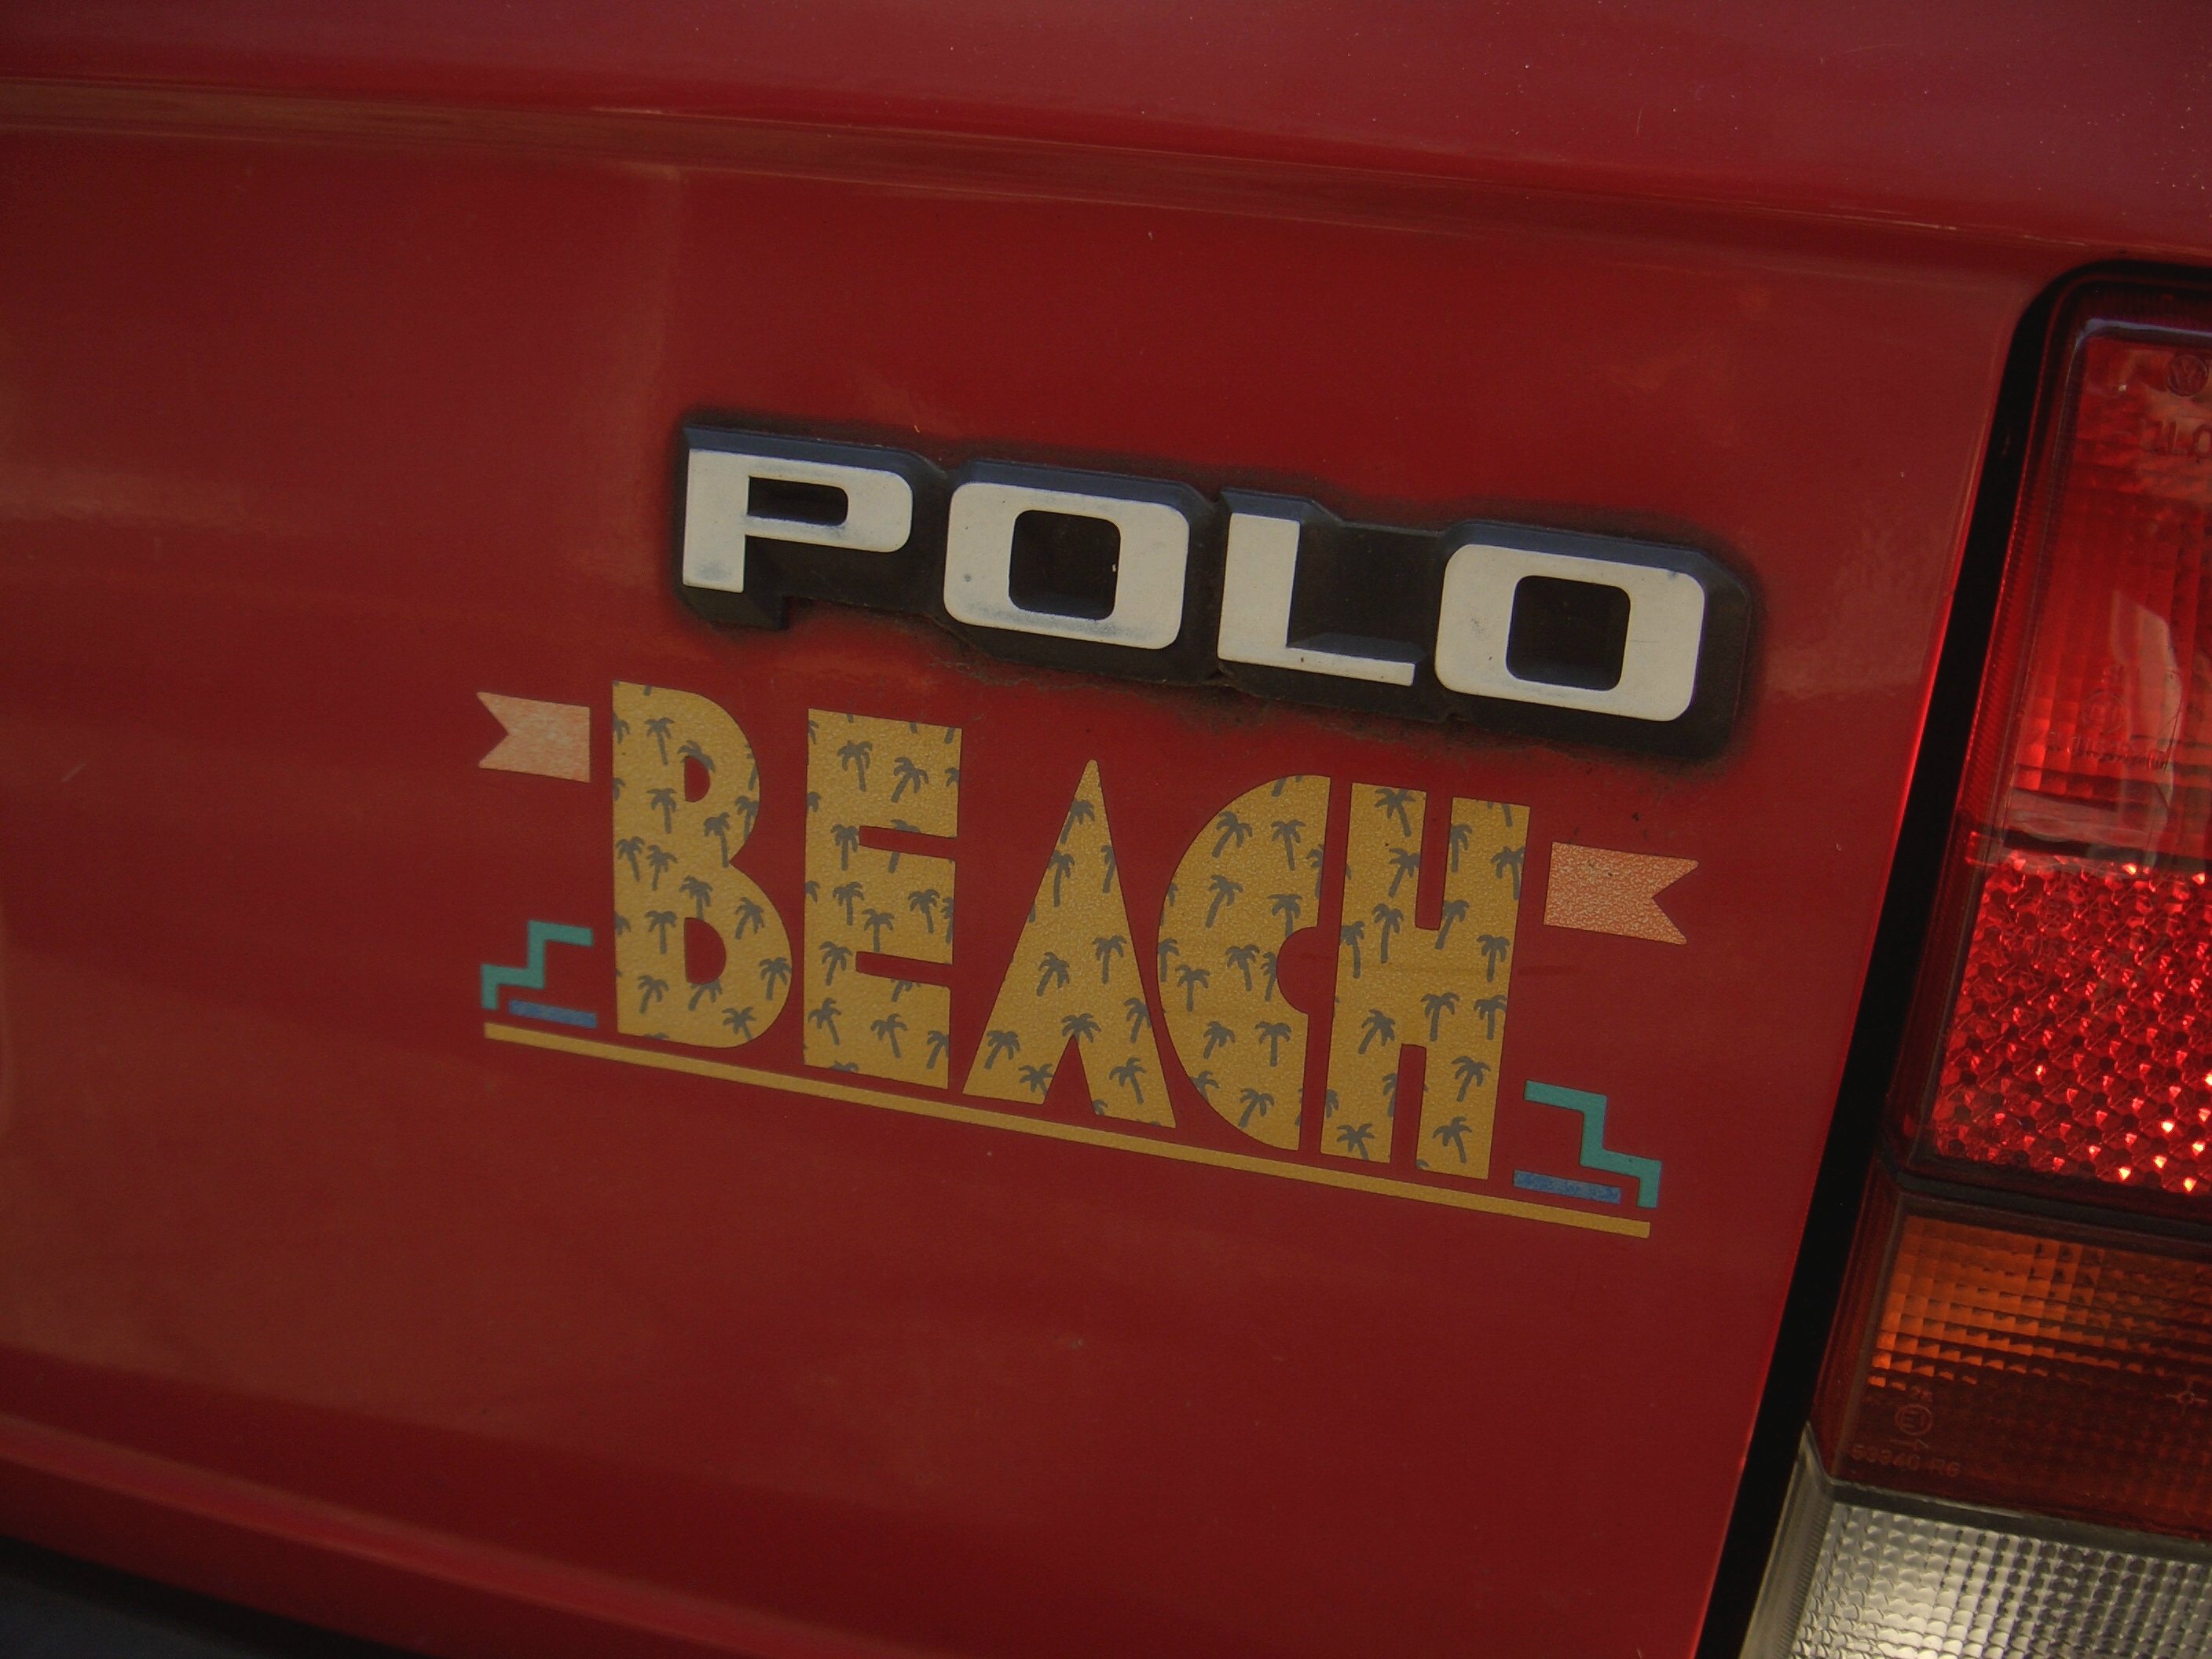 File:VW Polo GenII 86C 1981-1994 special edition BEACH bootlidright  2008-07-25 A.jpg - Wikimedia Commons